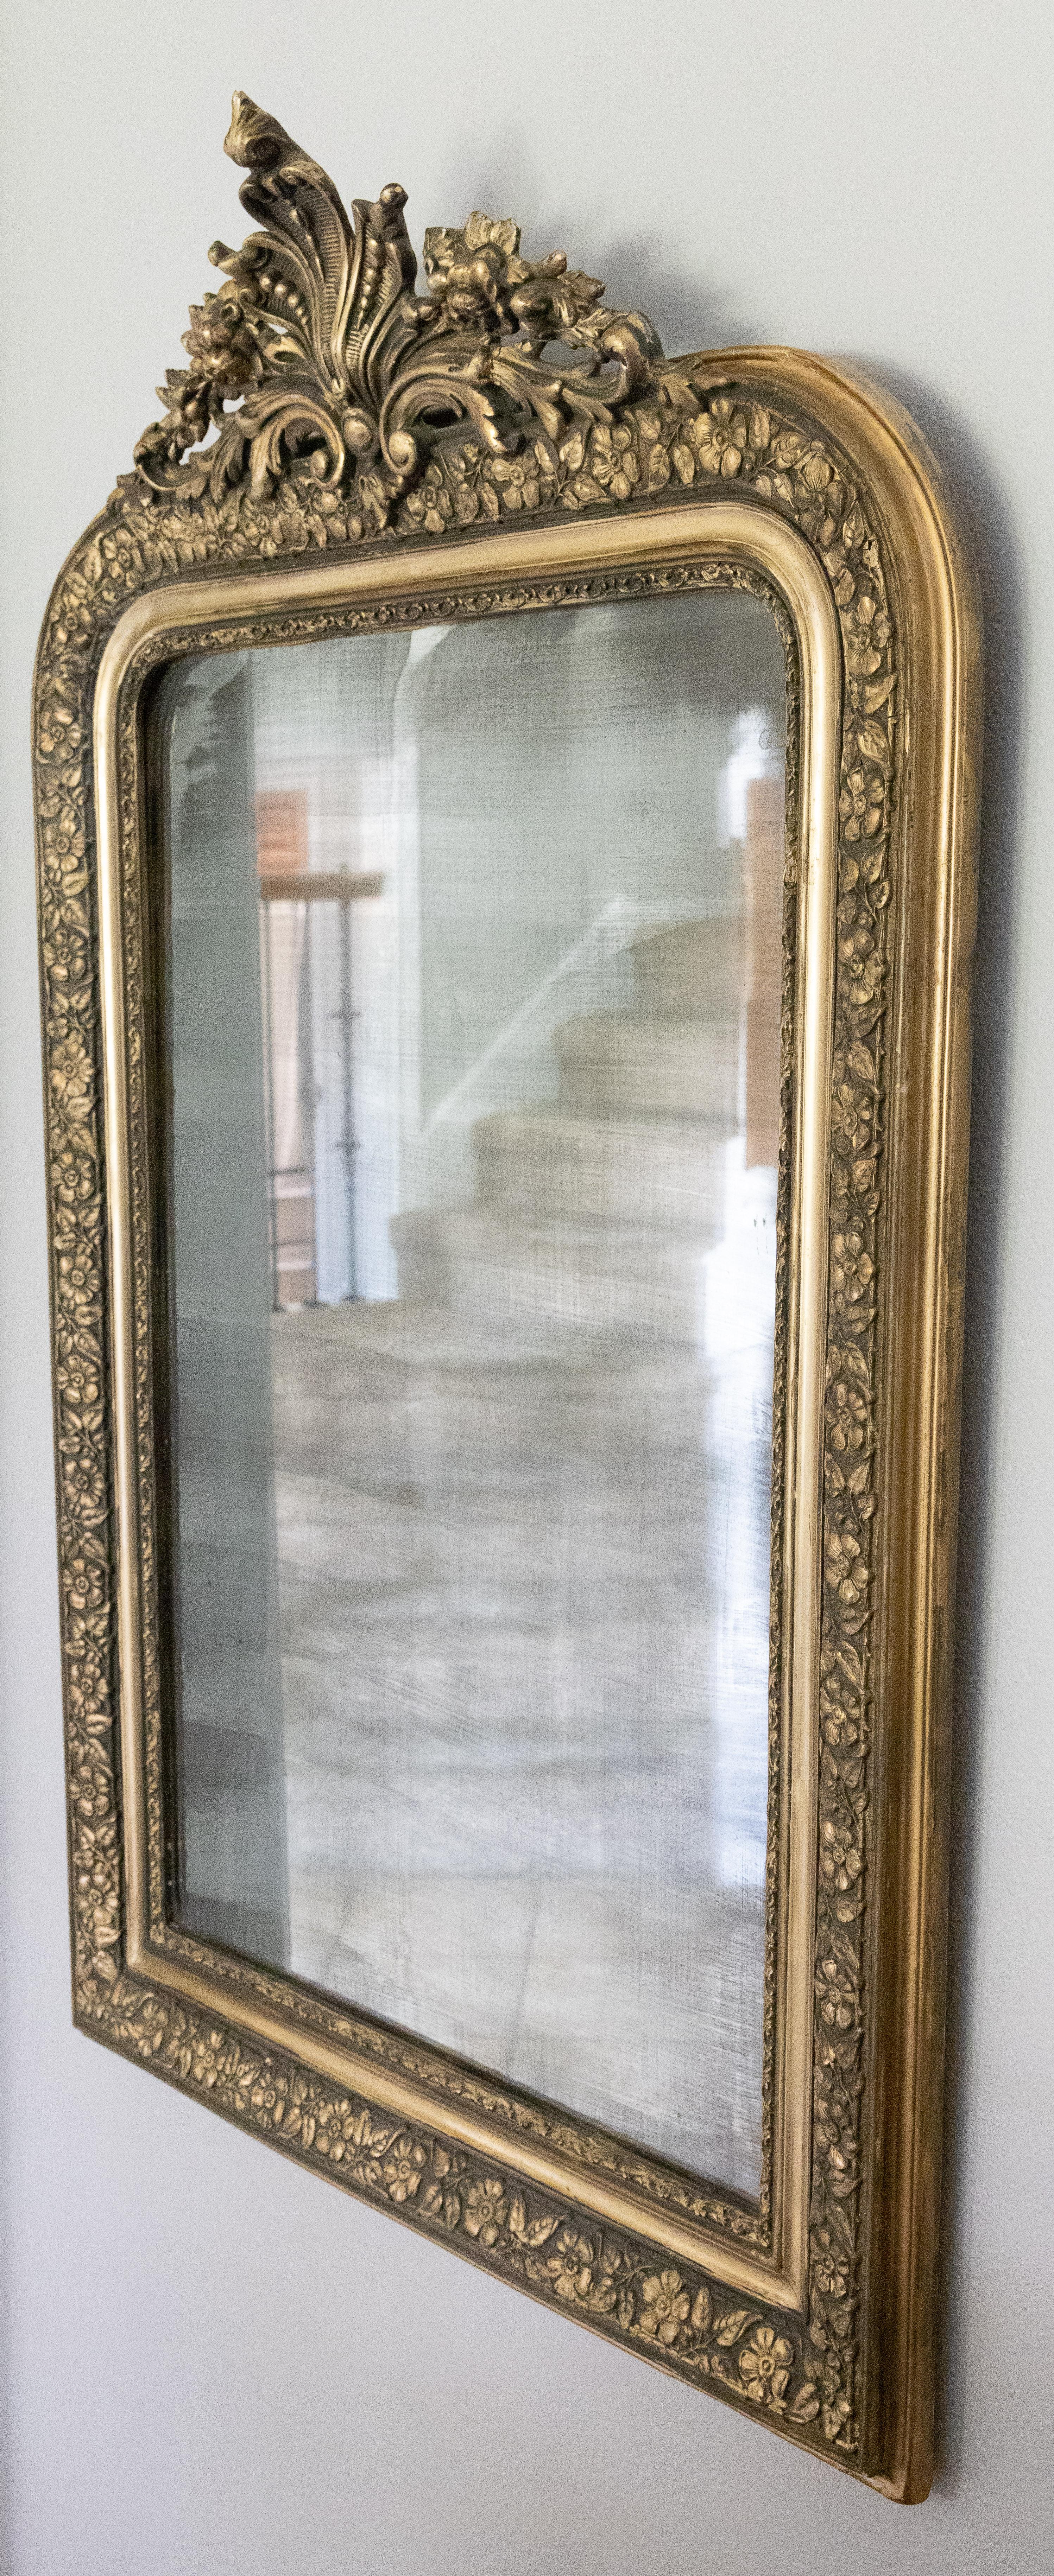 19th Century French Louis Philippe Giltwood Mirror with Crest In Good Condition For Sale In Pearland, TX